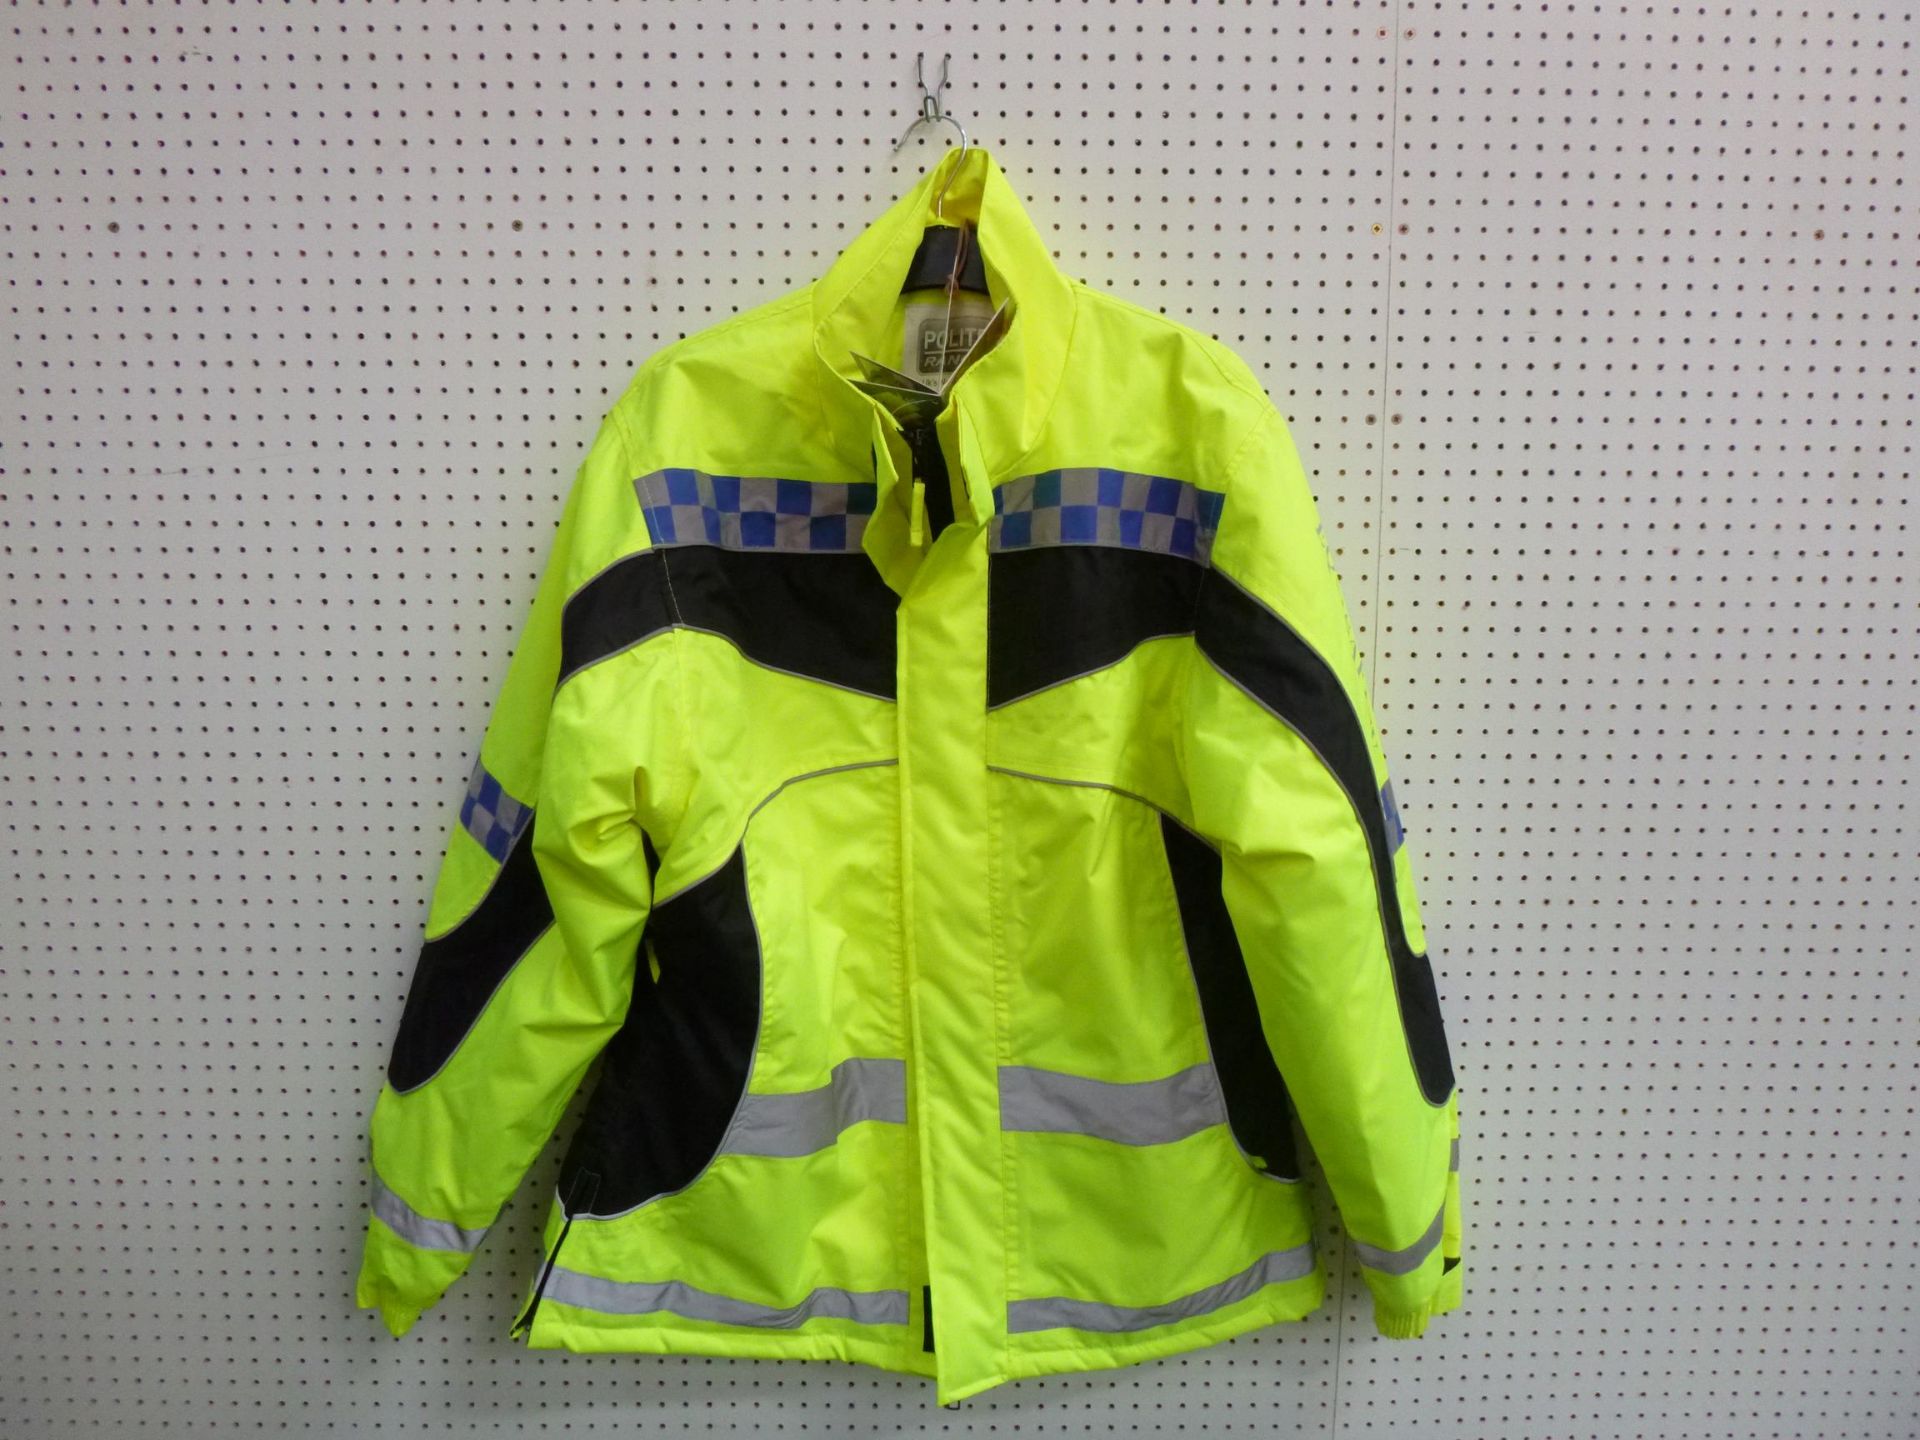 * A New 'Polite' Aspey Jacket 100% Waterproof and Breathable Size X Large. RRP £86.99